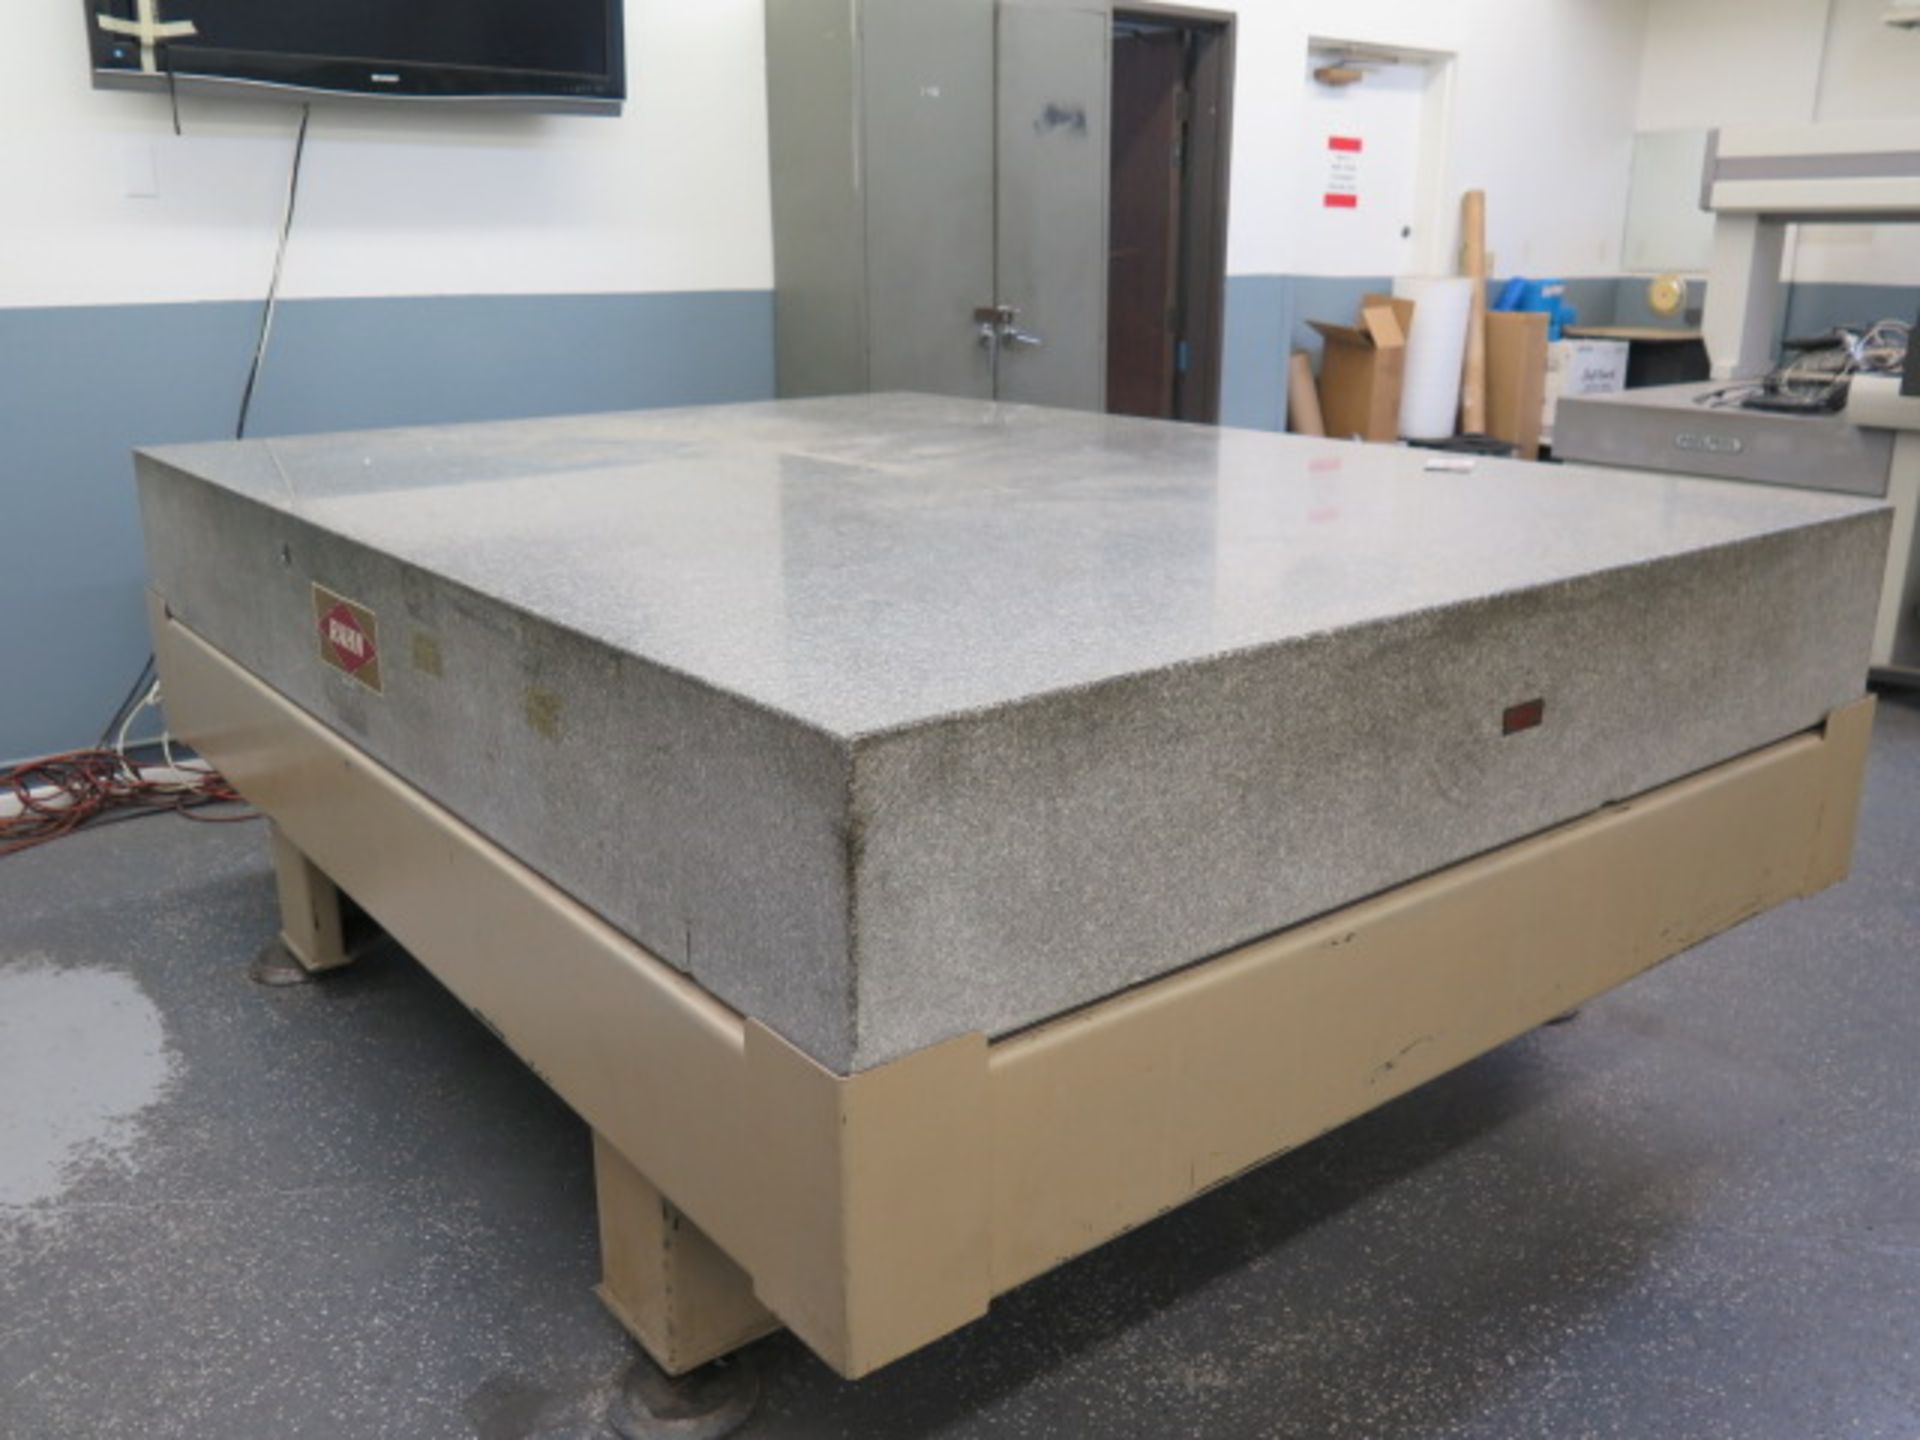 Rahn 72” x 96” x 12” Grade “A” Granite Surface Plate w/ Stand (SOLD AS-IS - NO WARRANTY) - Image 4 of 7